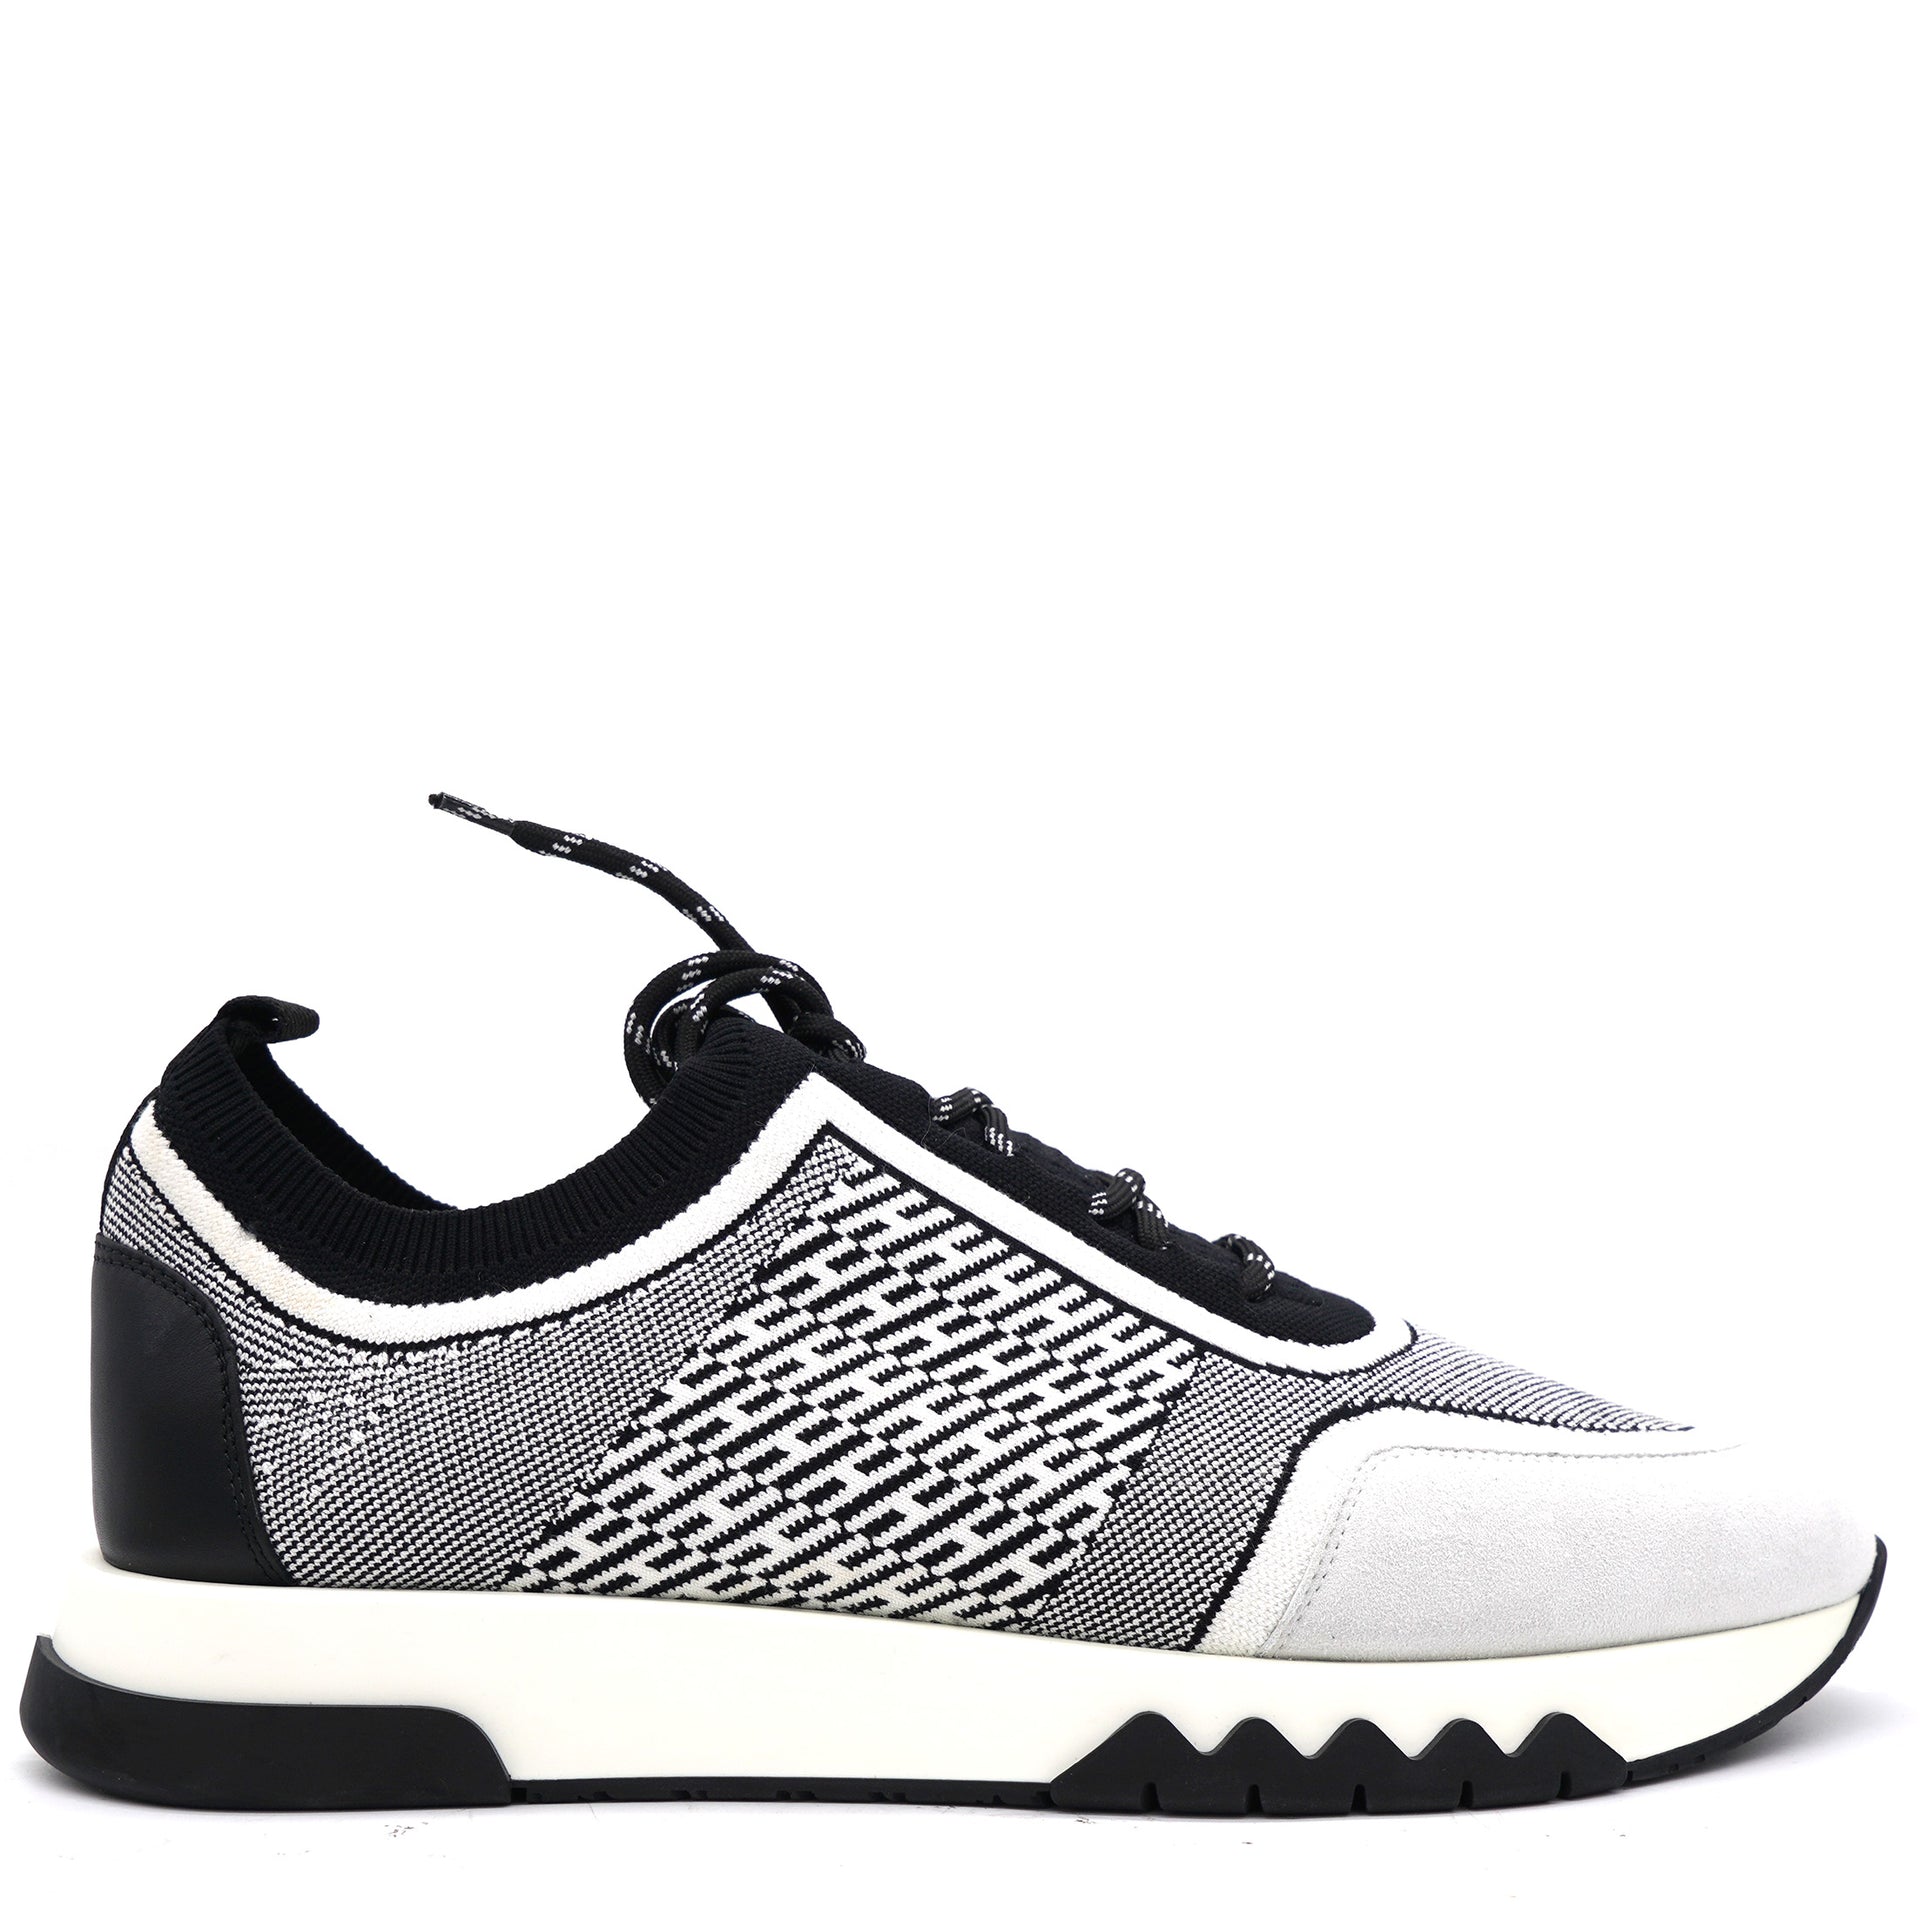 C-Addict Black/White Knit Fabric And Suede Low Top Sneakers 42